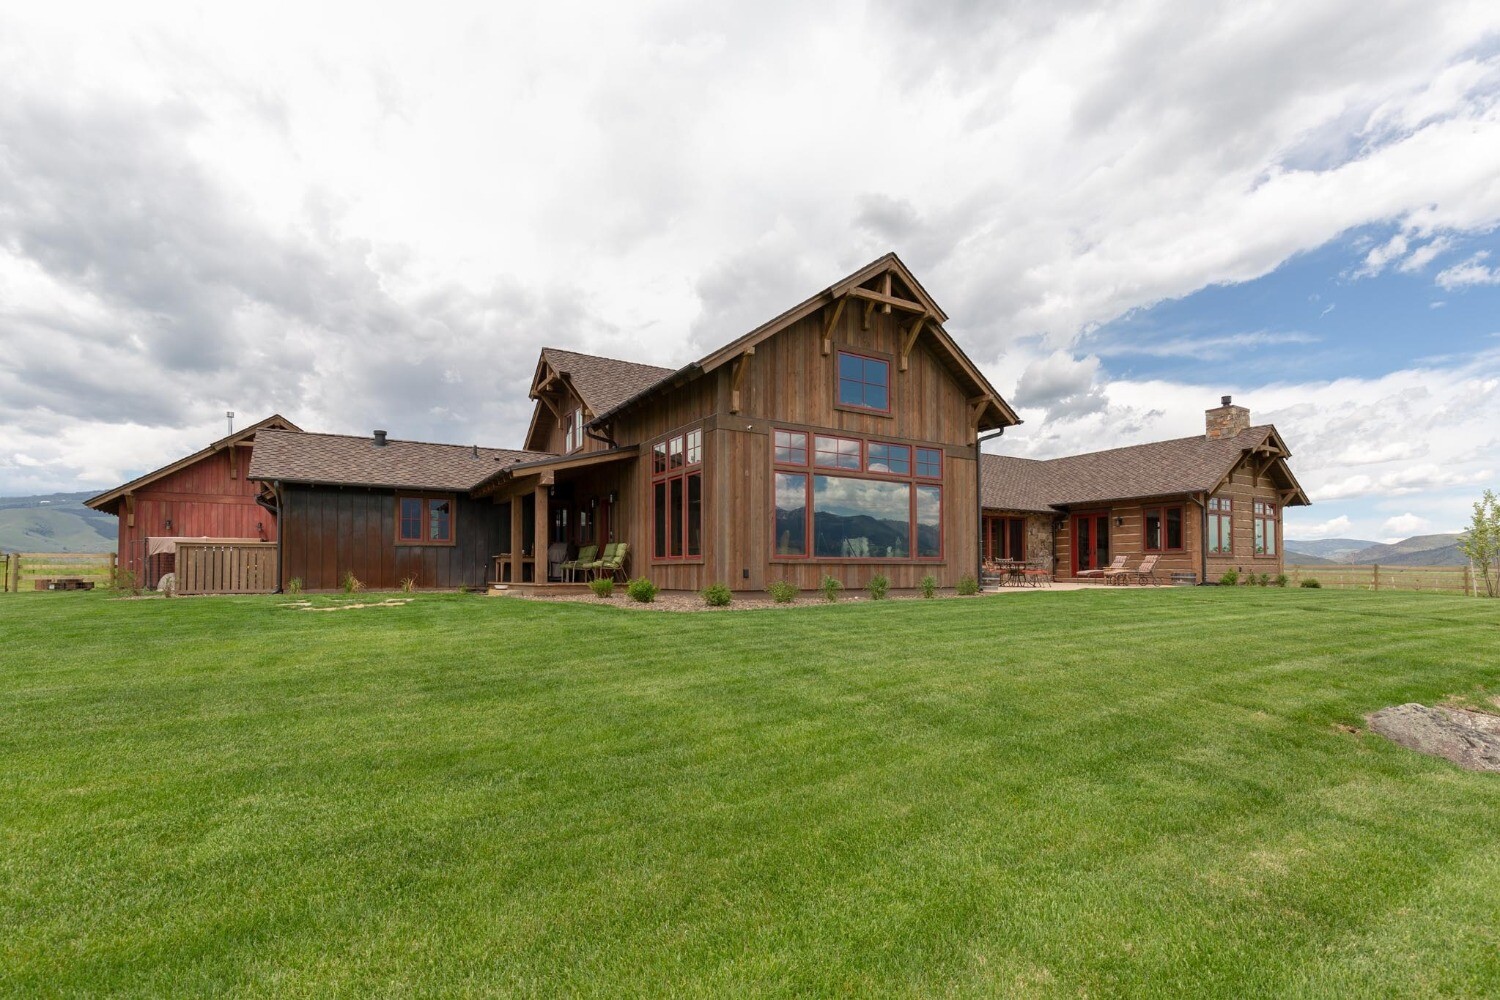 Beautiful home with mixed colors: Western, Tackroom and Custom Barn Red